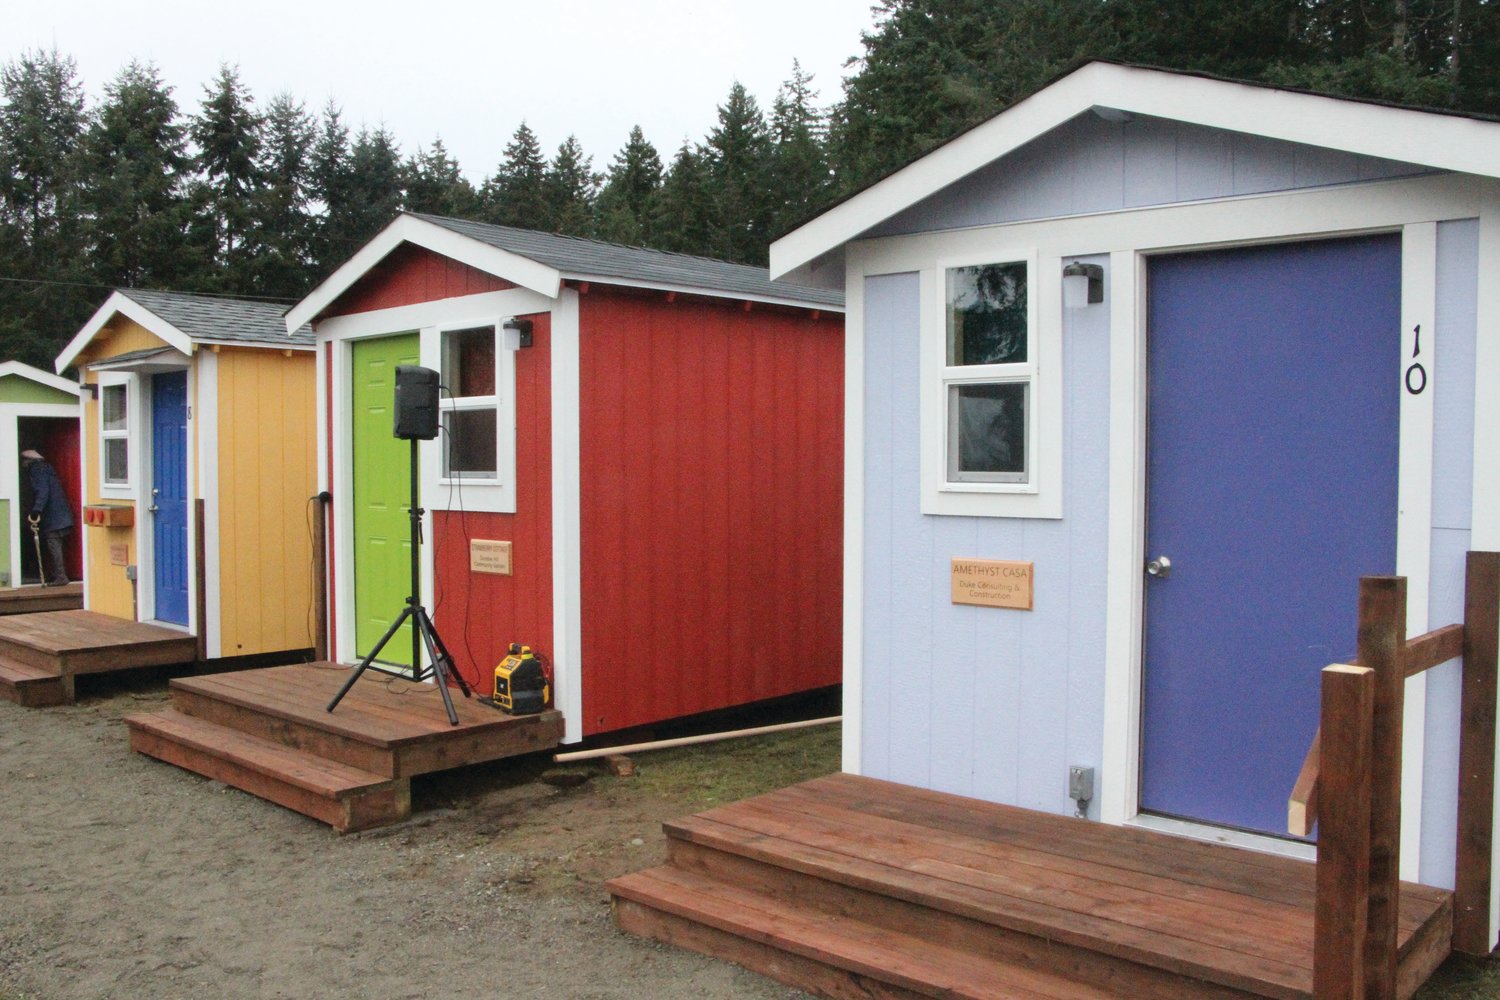 While not technically permitted by the county yet, the tiny houses at Peter’s Place in Port Hadlock have already begun housing residents. Organizers of the project are working to bring the village up to code.